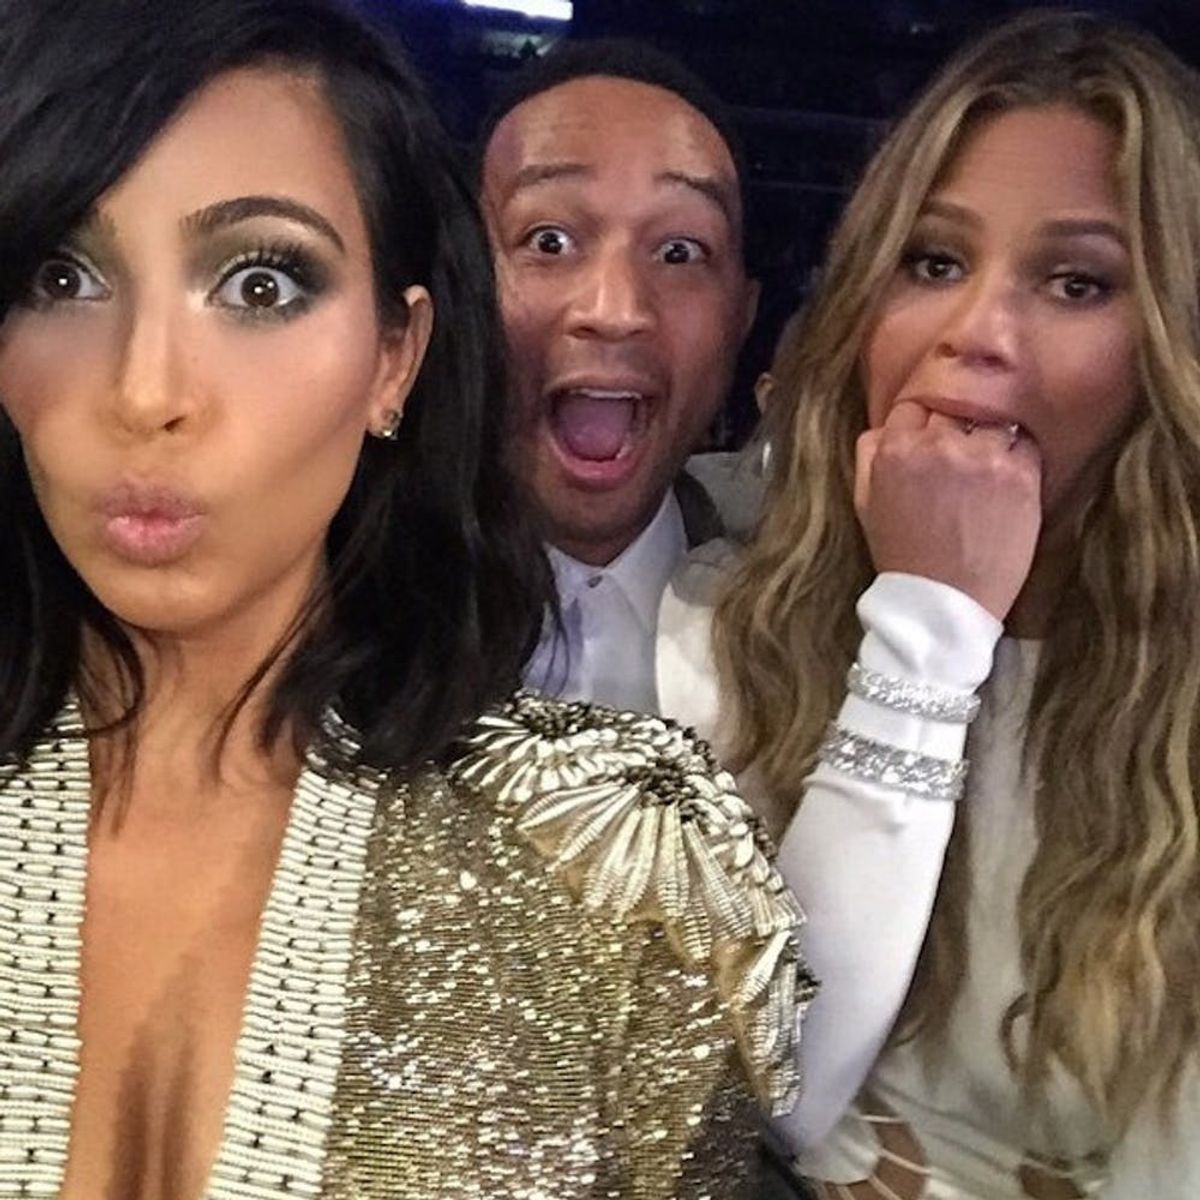 20 Celeb Selfies That Sum Up the Grammys